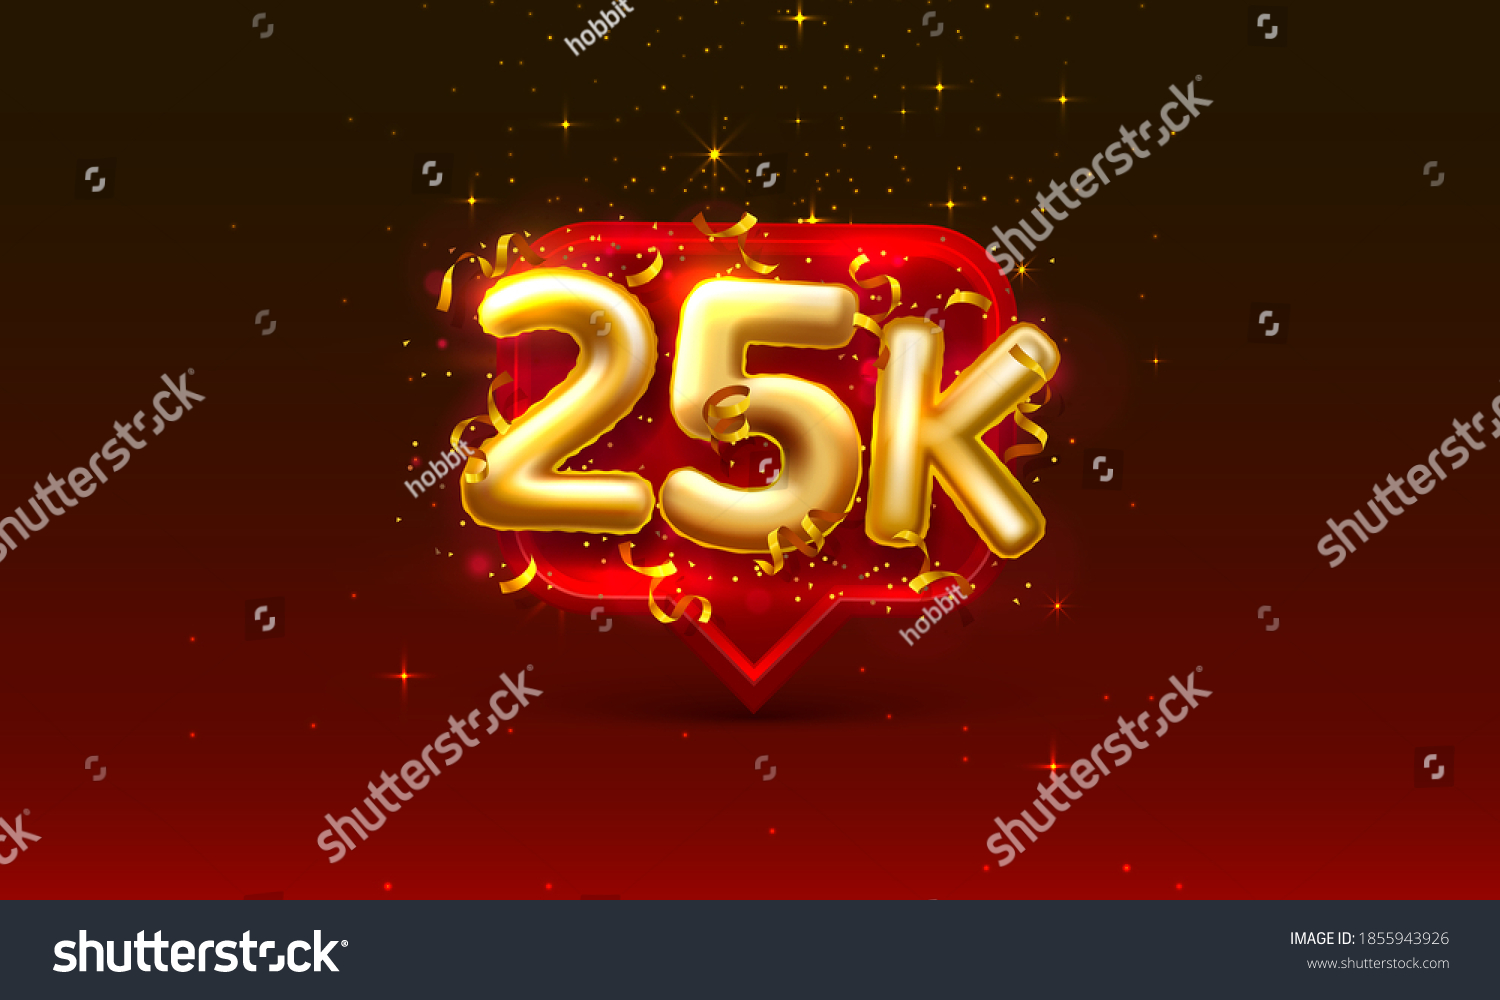 SVG of Thank you followers peoples, 25k online social group, happy banner celebrate, Vector illustration svg